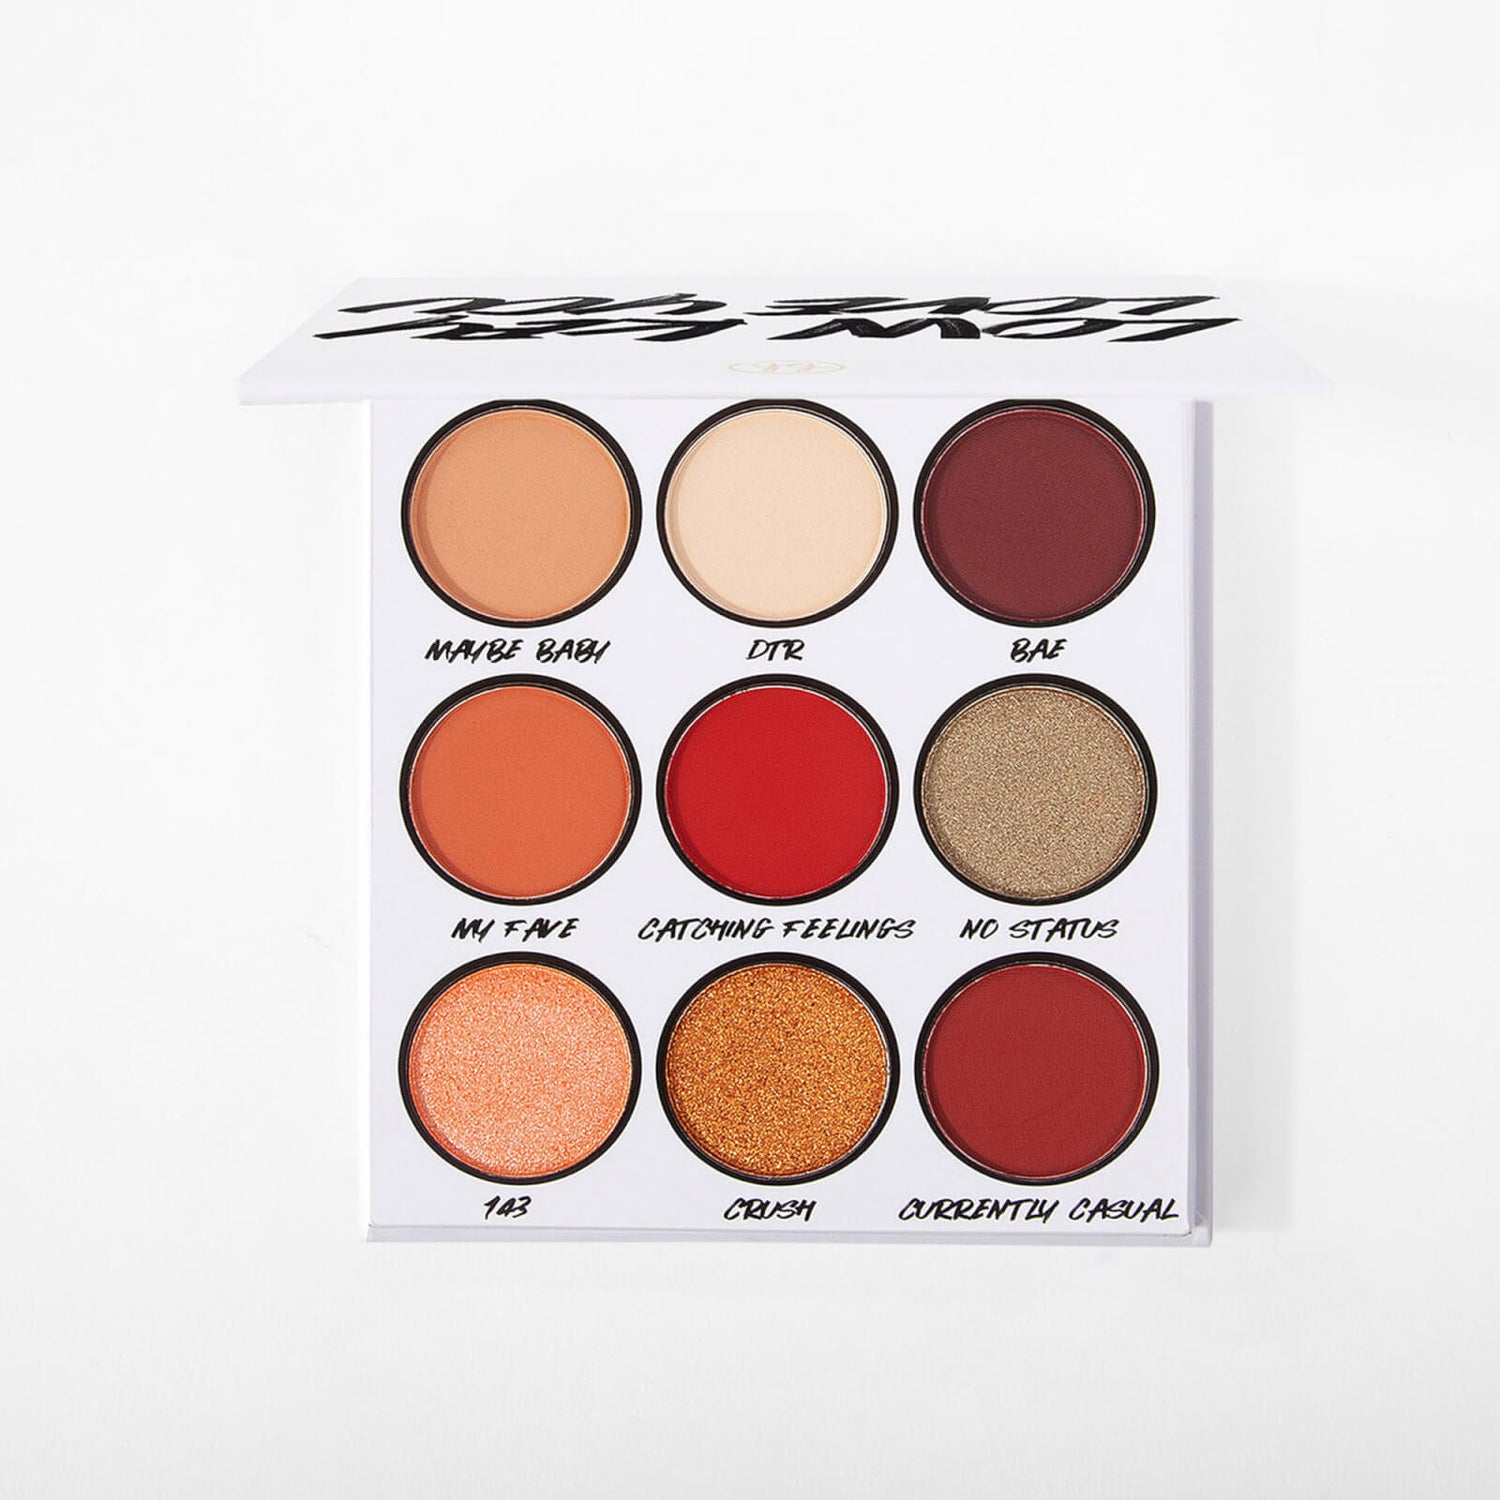 Low Key Love You 9 Palette Cosmetics BH It! Shadow Say Color | 